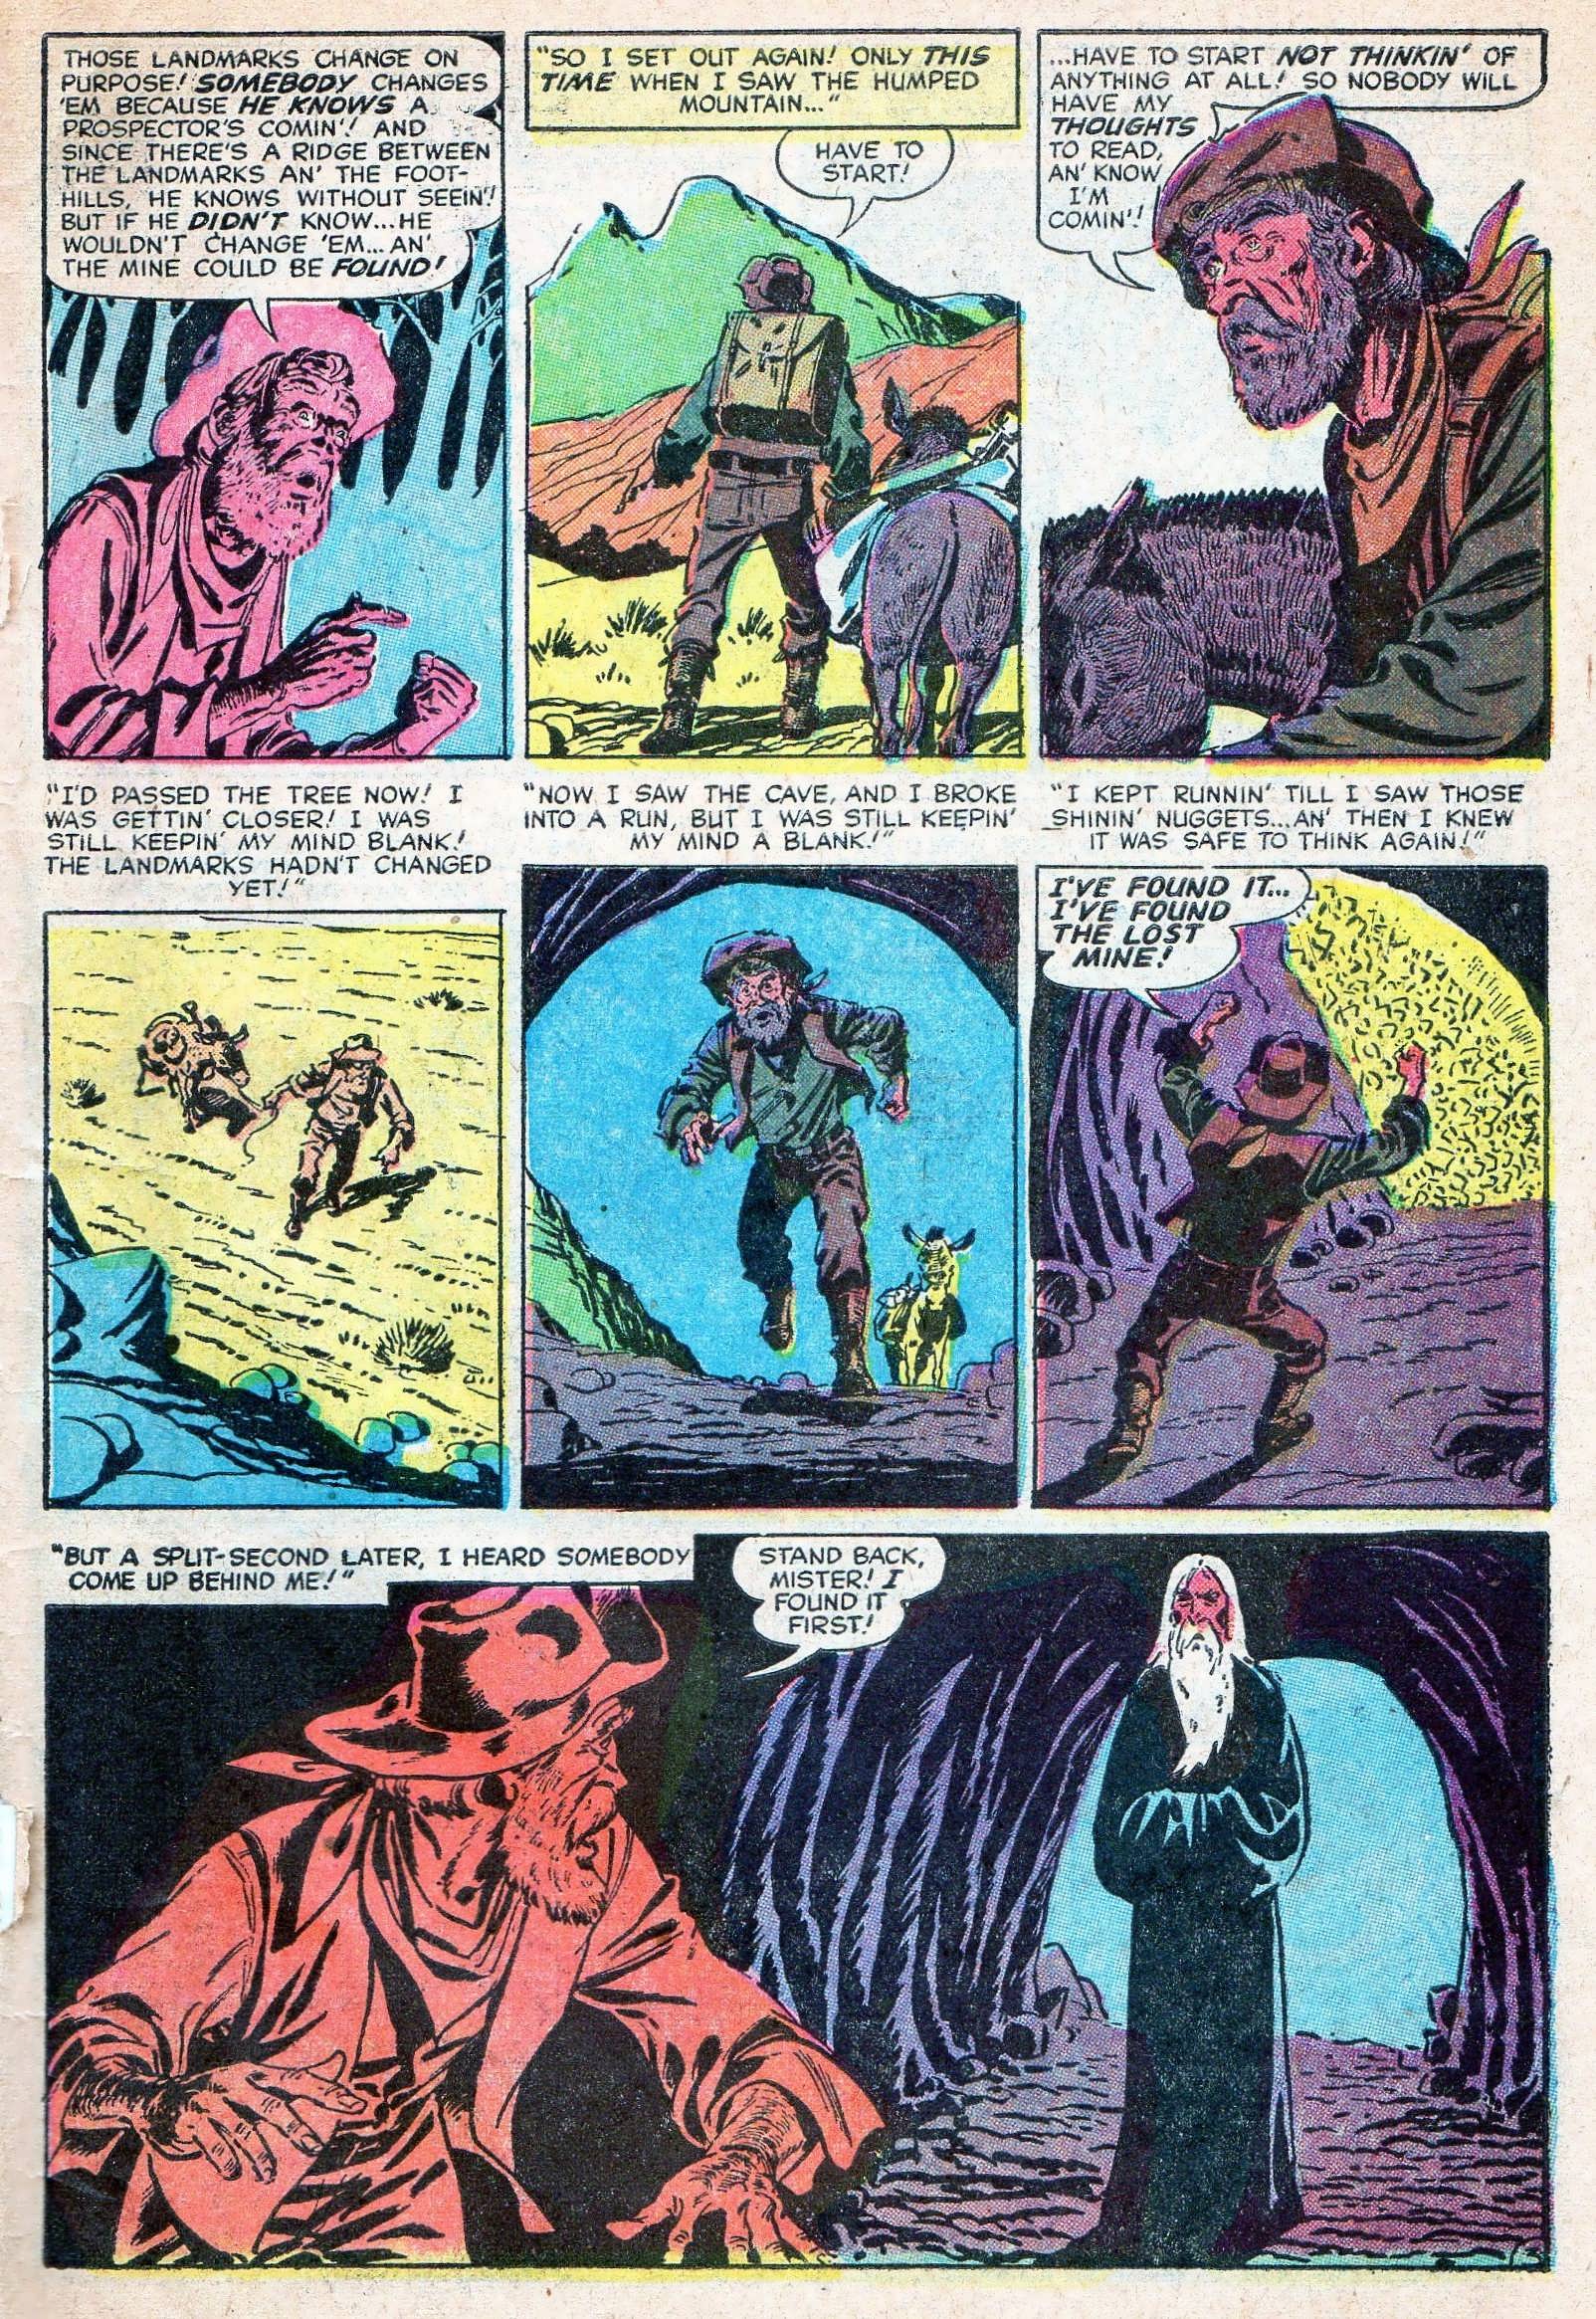 Marvel Tales (1949) 159 Page 30